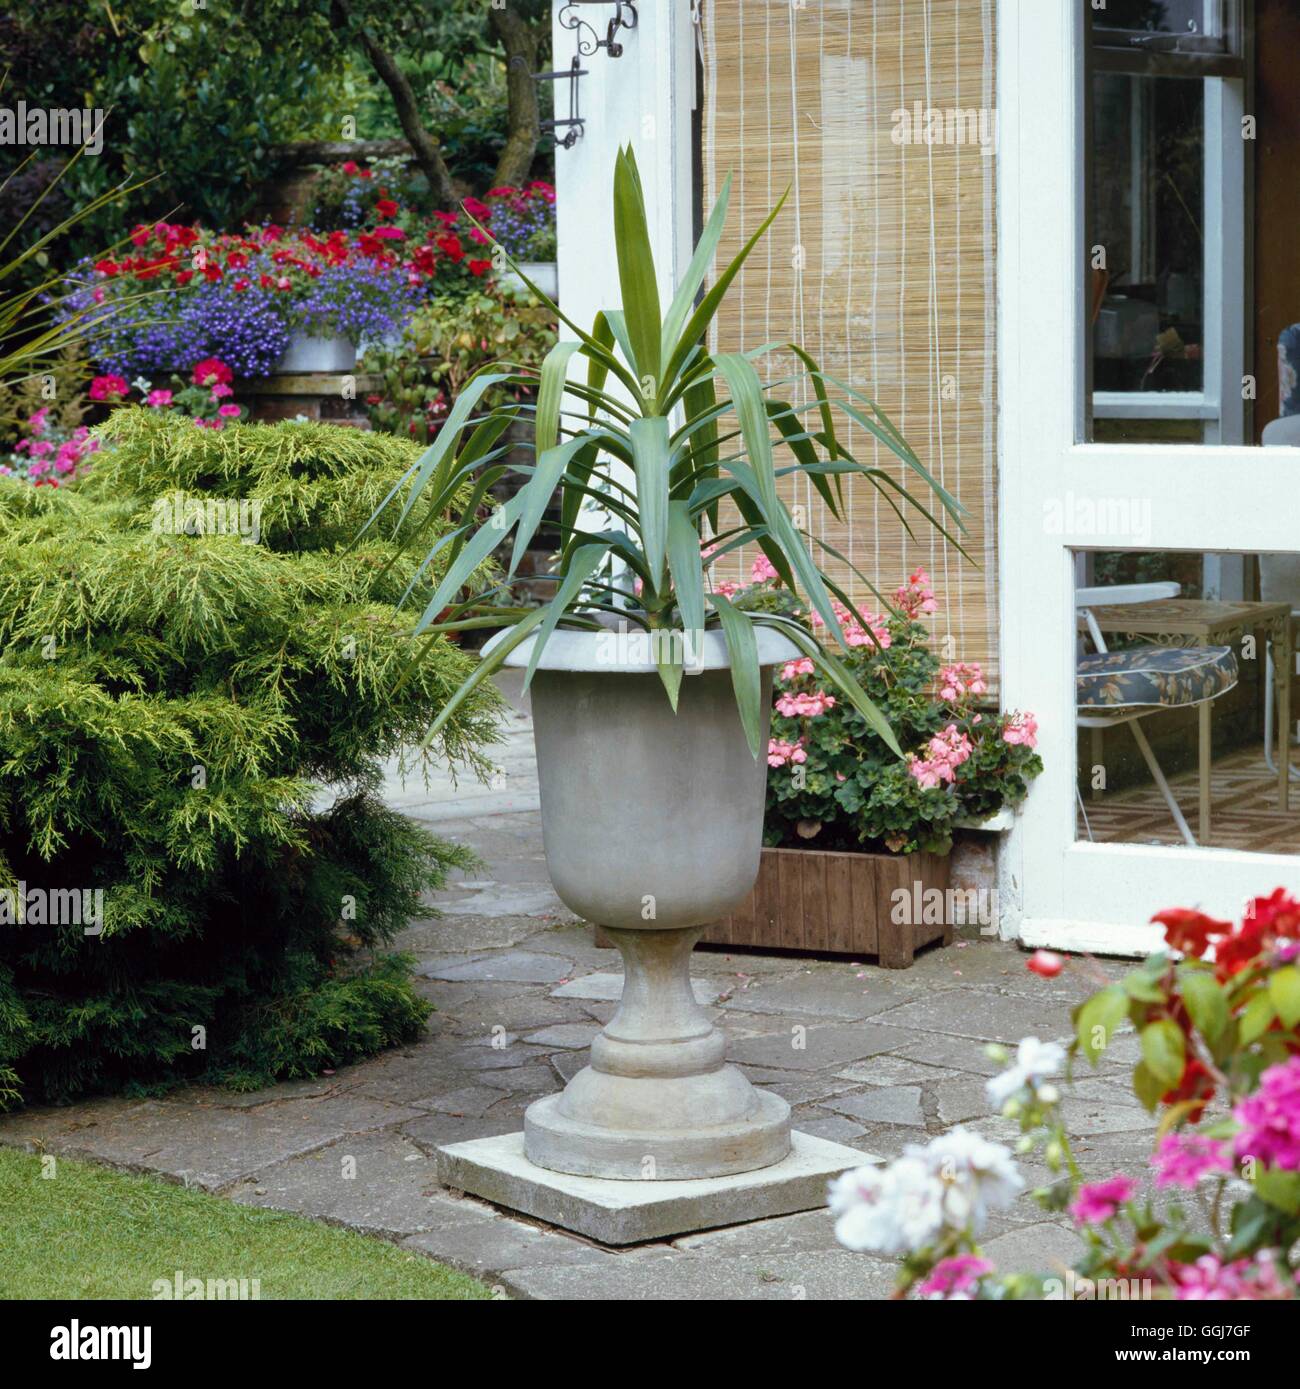 Containers - Shrubs - Home-made pedestal made in cement and planted with a Yucca   CTR009338     Pho Stock Photo